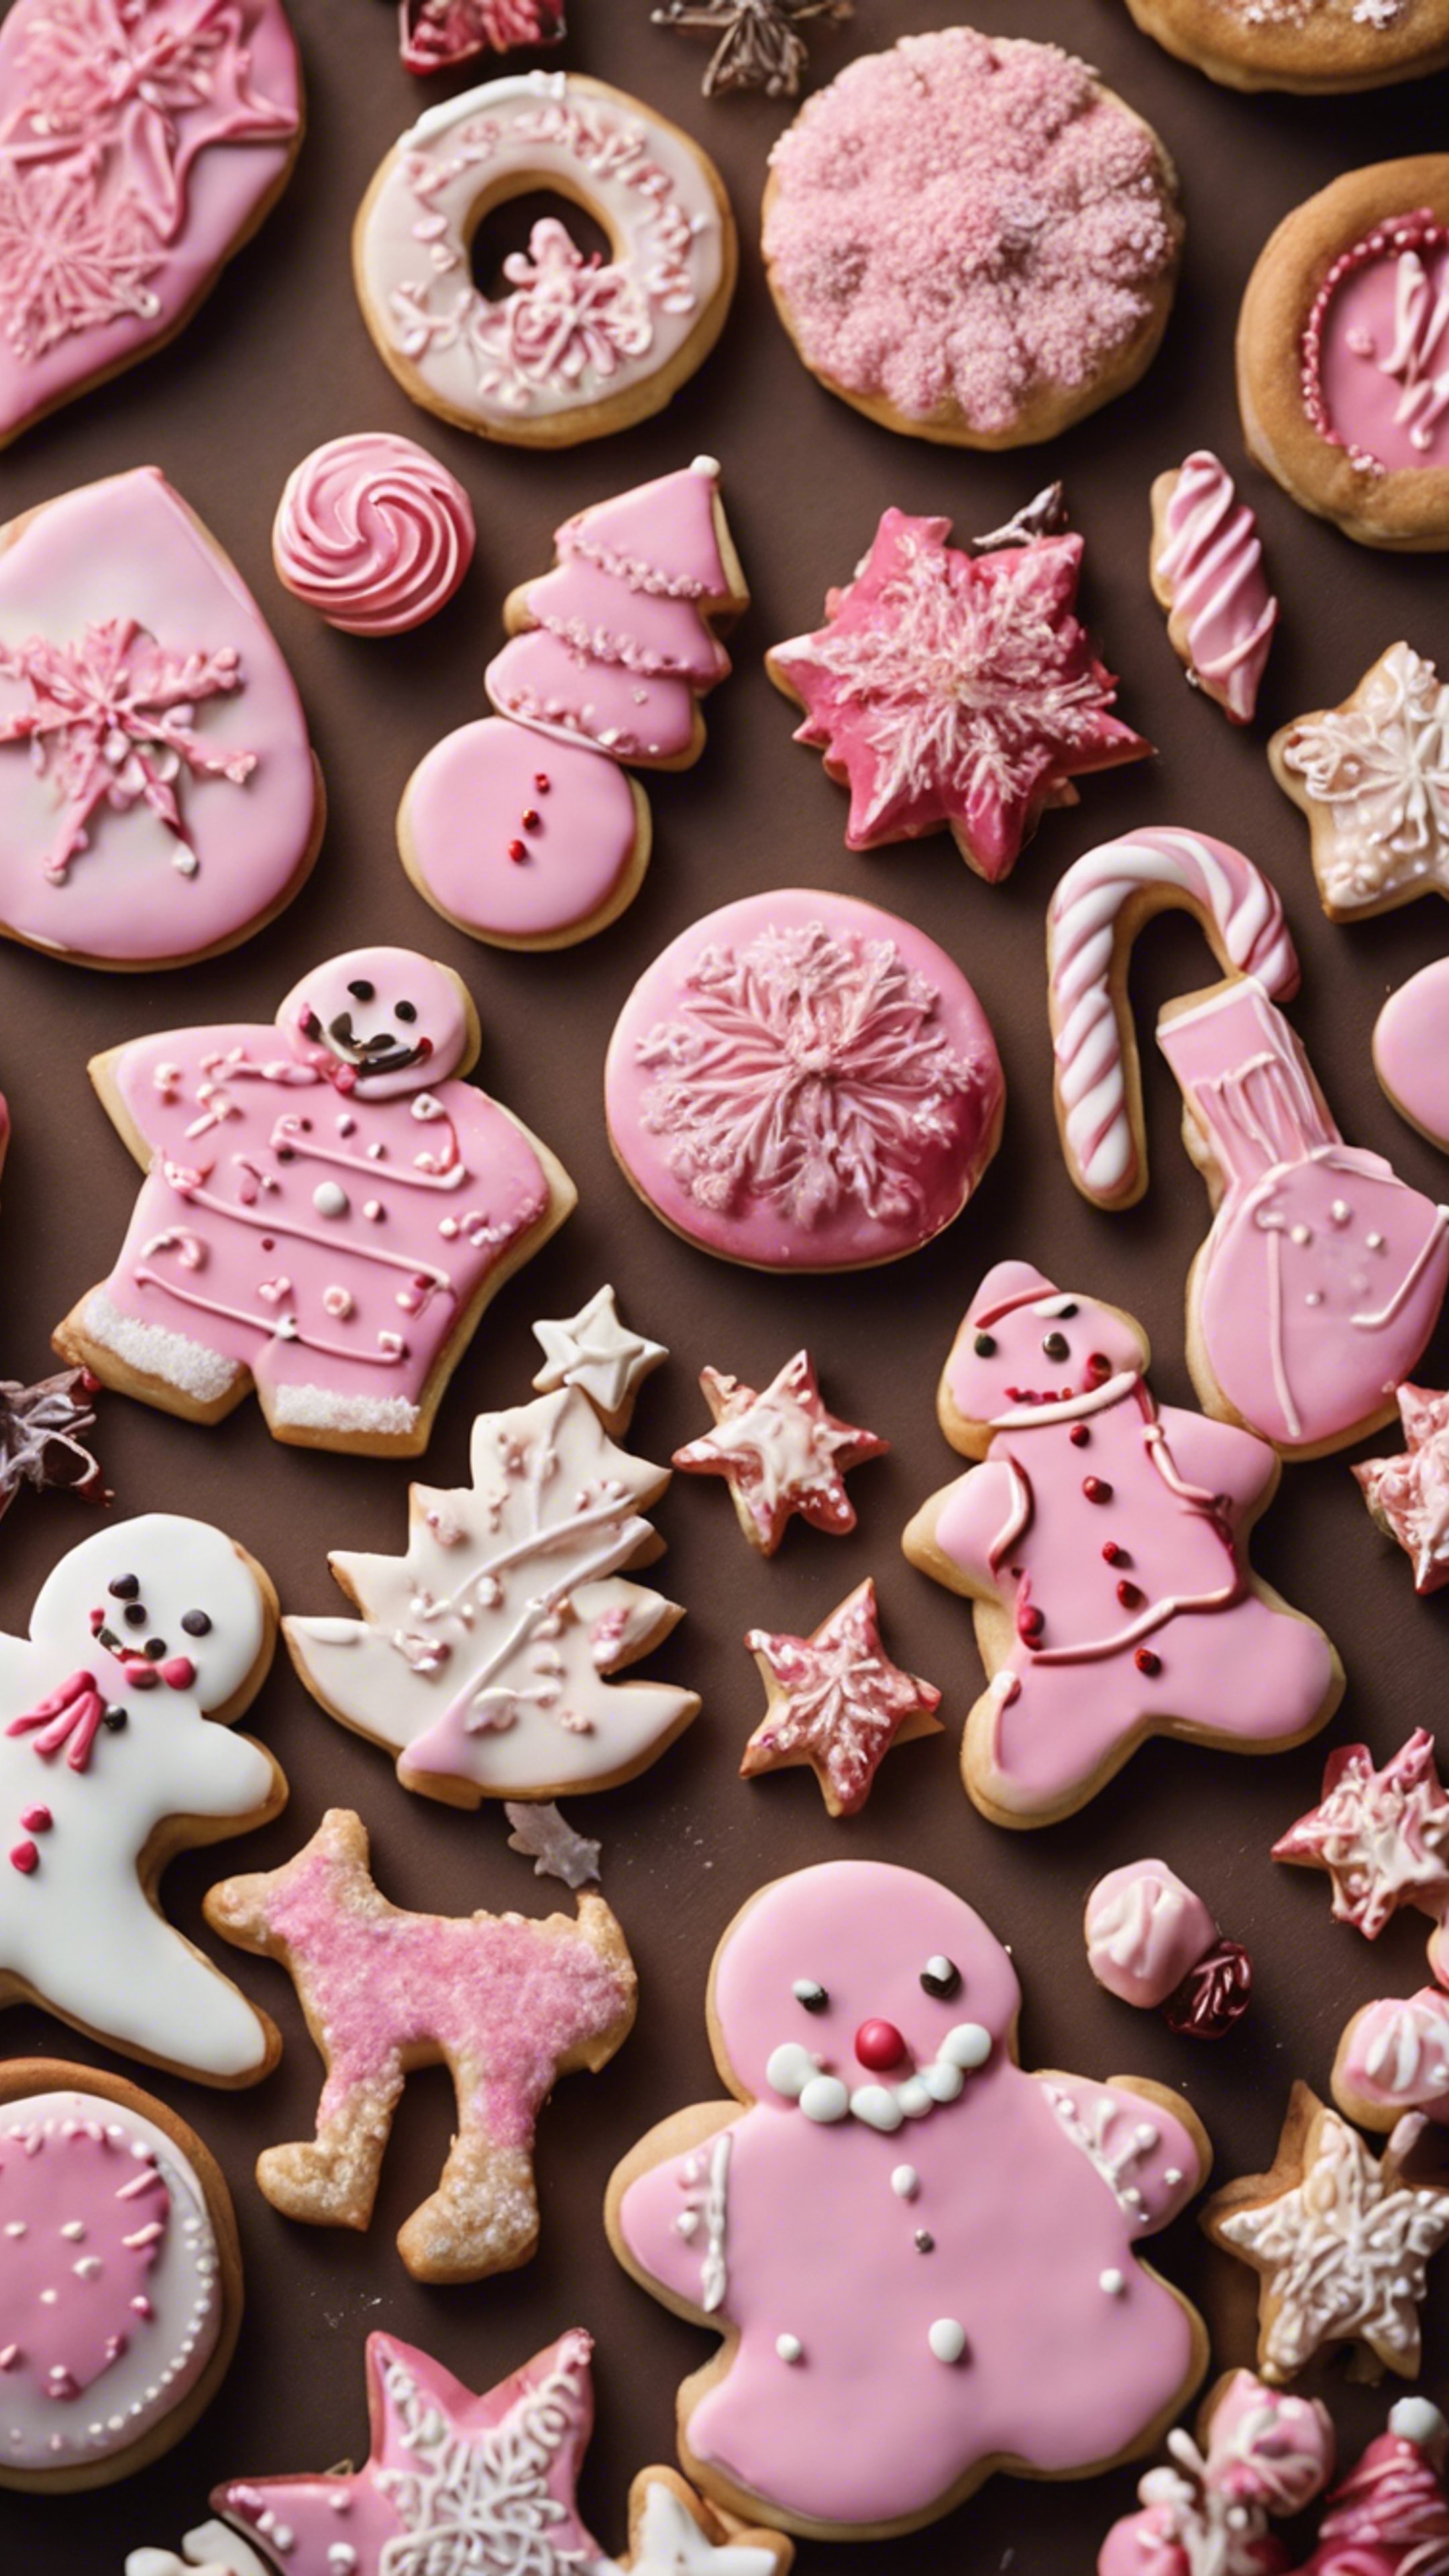 Various types of pink Christmas cookies and sweets laid on a table with festive decorations. ផ្ទាំង​រូបភាព[bb72647e6a9944a5b5aa]